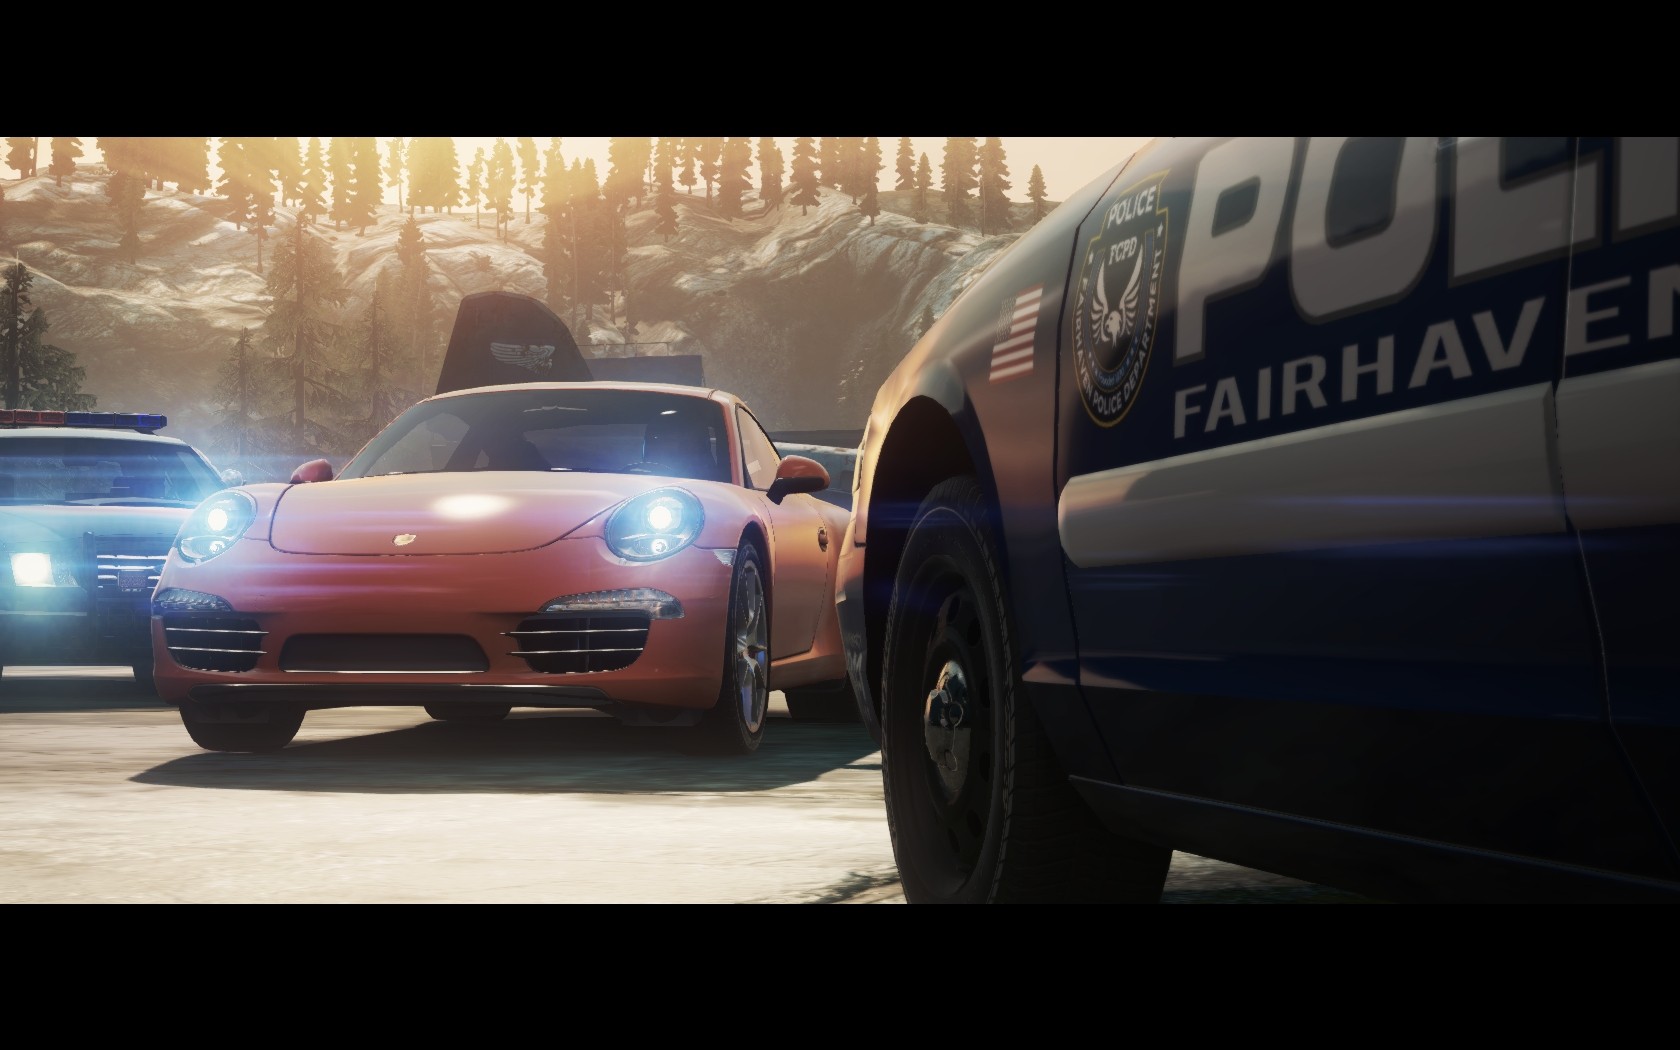 police, Need For Speed, Car, Porsche, Police Cars Wallpaper